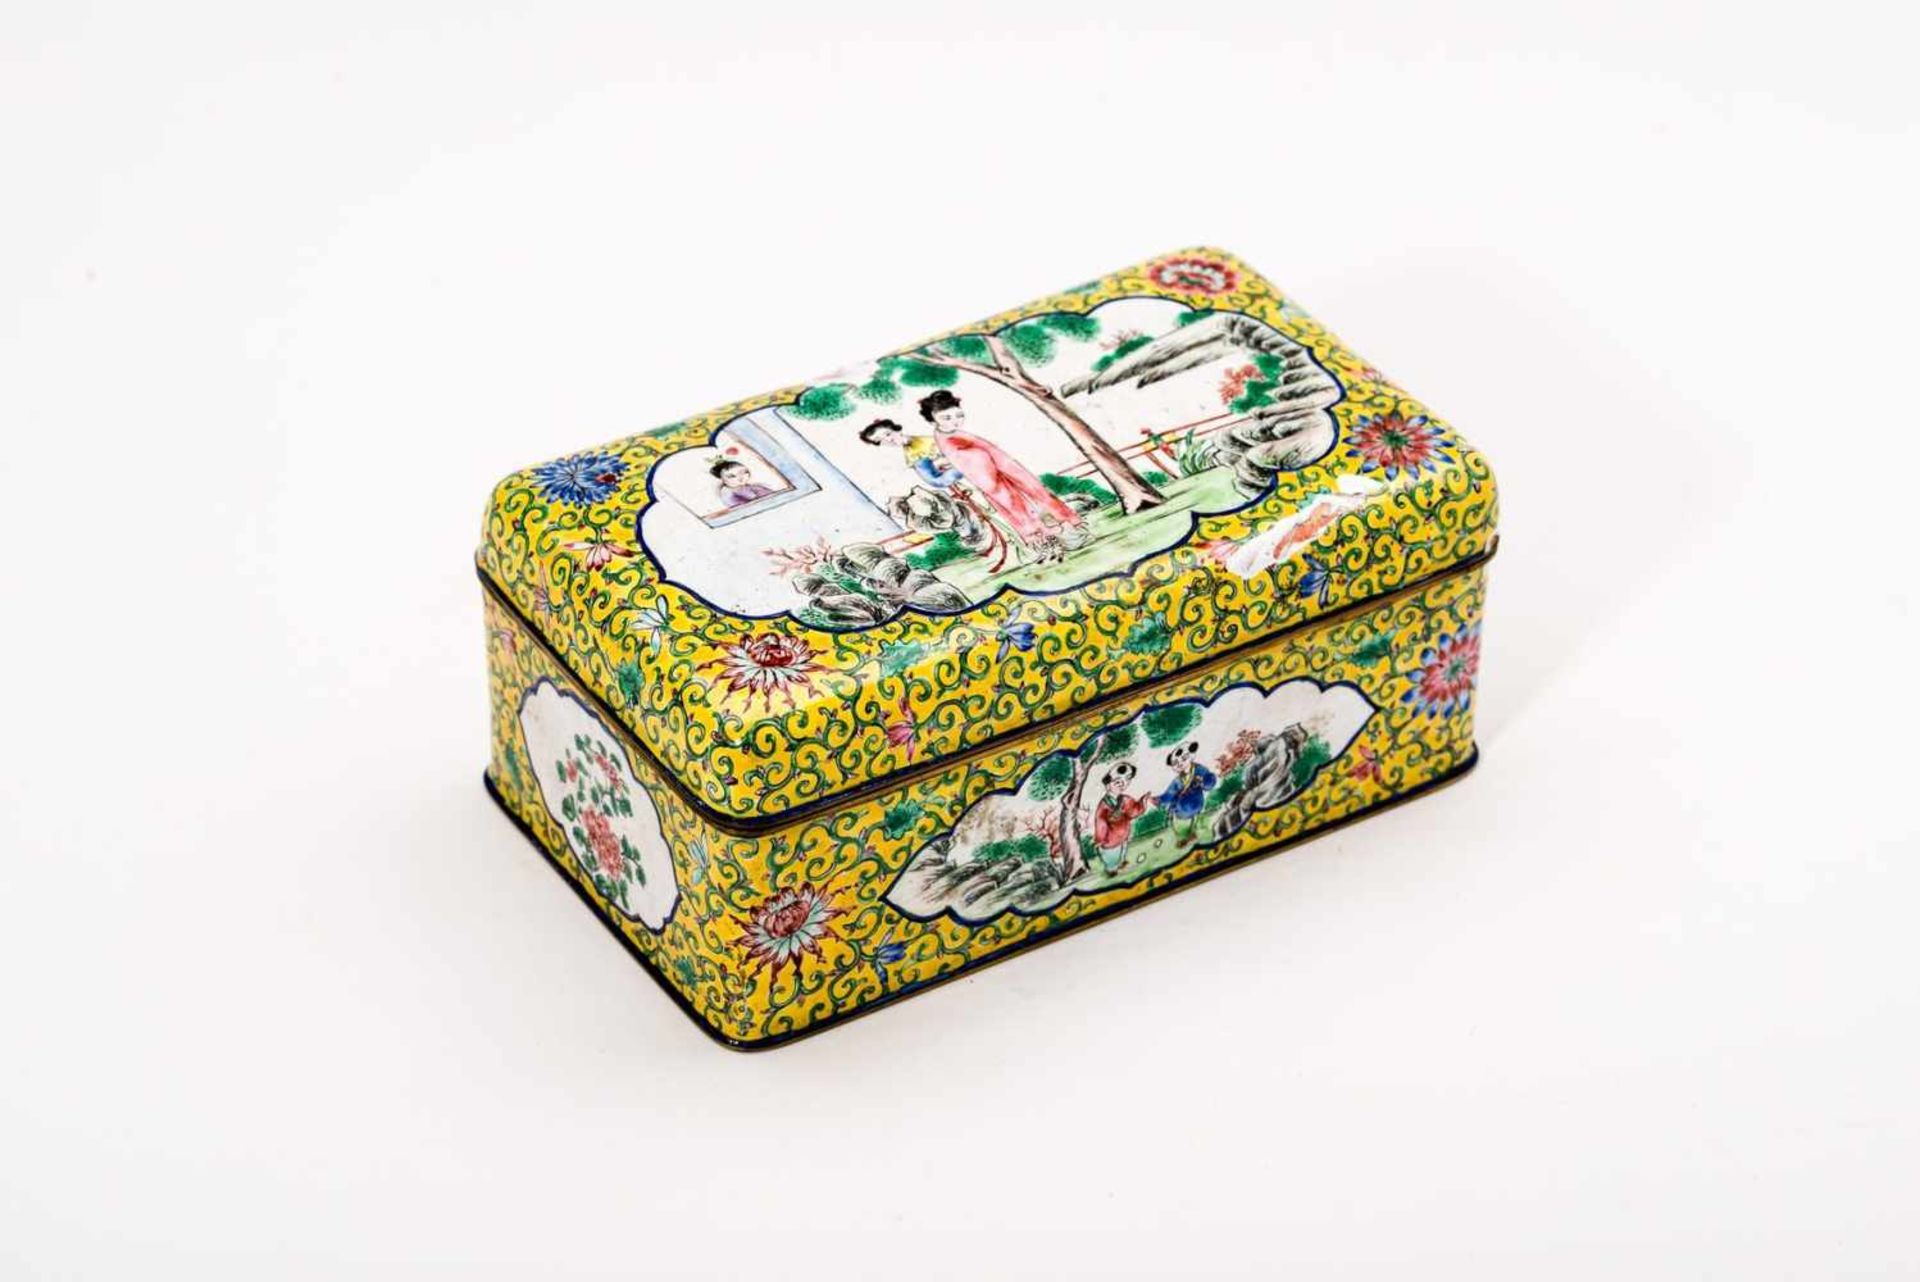 CANTON ENAMEL TEA CADDY Canton enamel. China, Qing Dynasty With figural depictions of court ladies